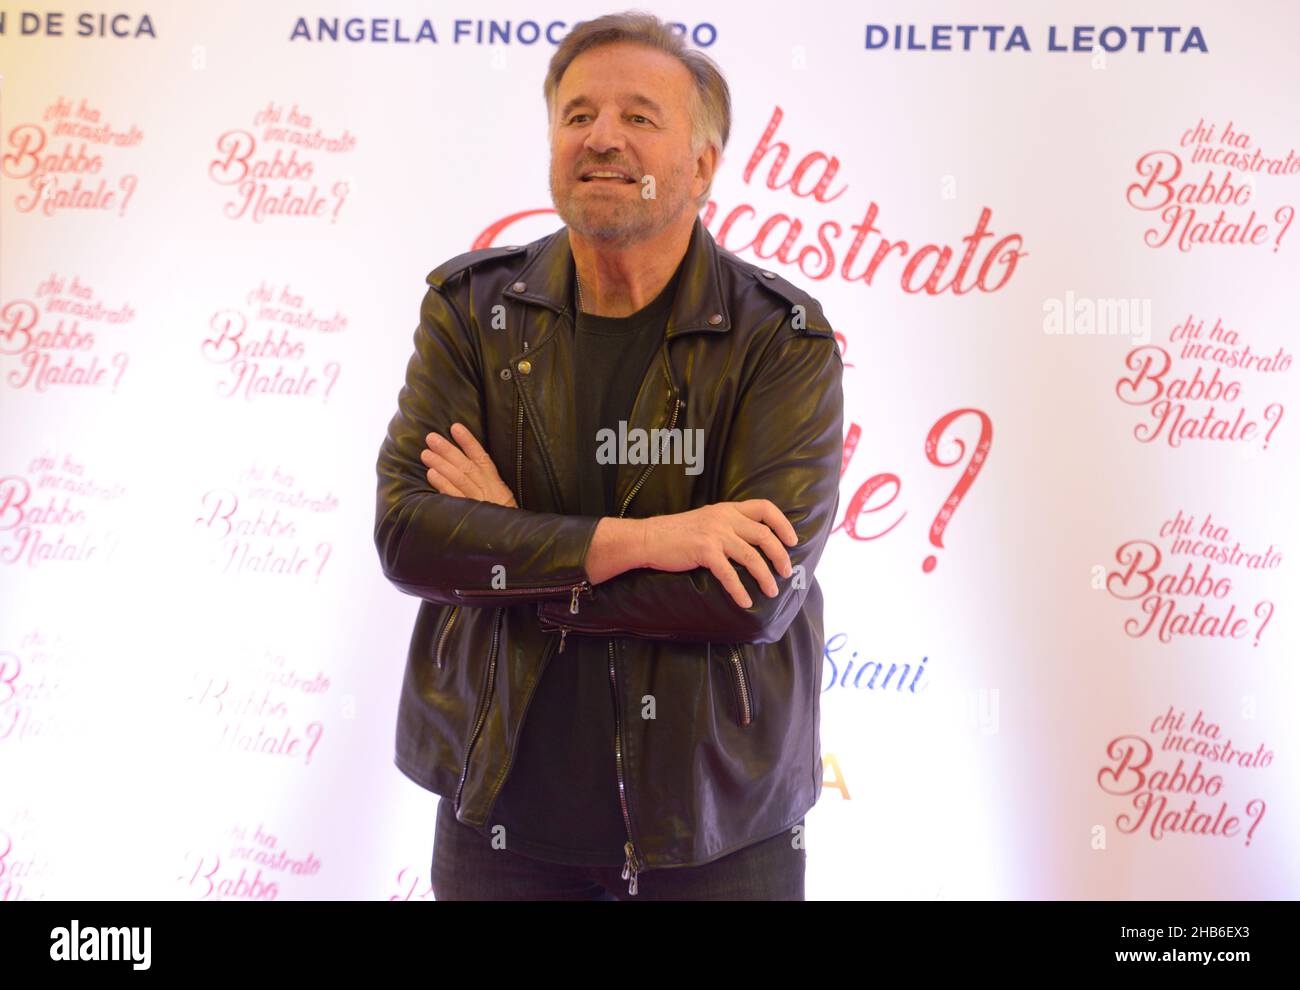 Christian De Sica pose during a photocall session for the Christmas film 'Chi ha incastrato Babbo Natale?' in Naples, Italy Stock Photo